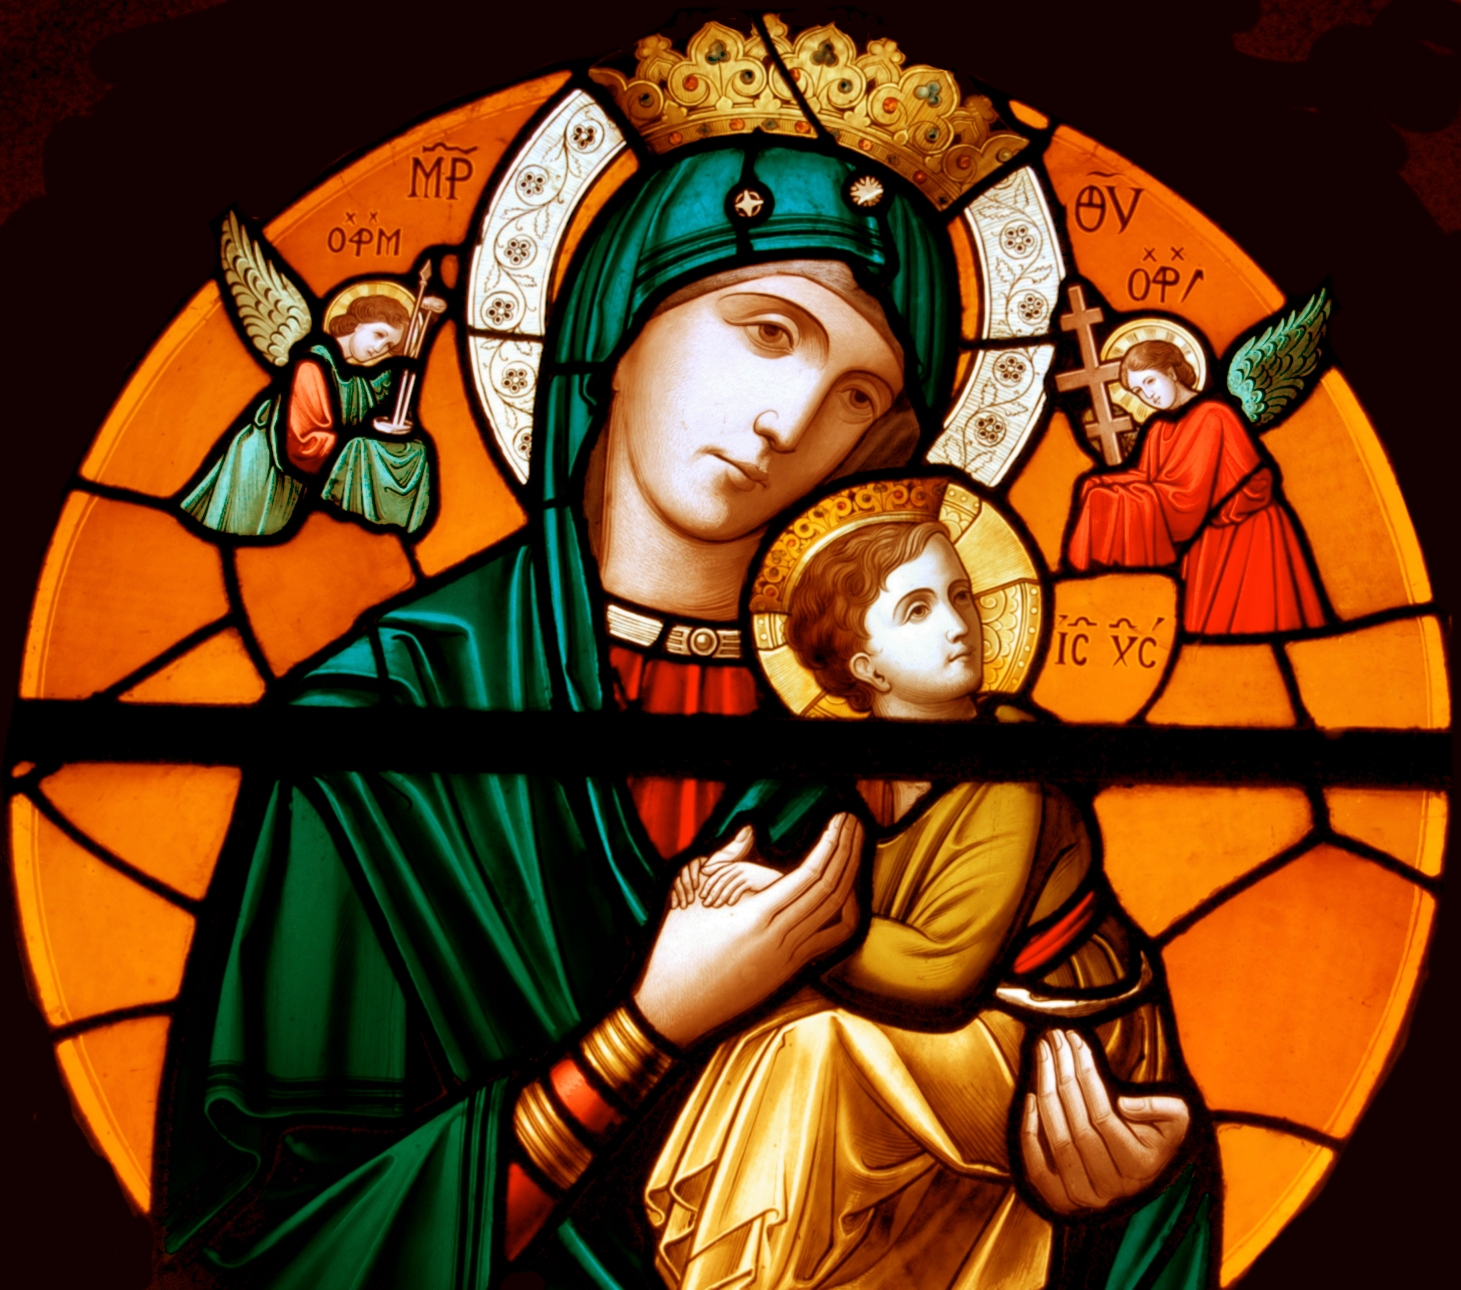 Our Lady of Perpetual Help - June 27.